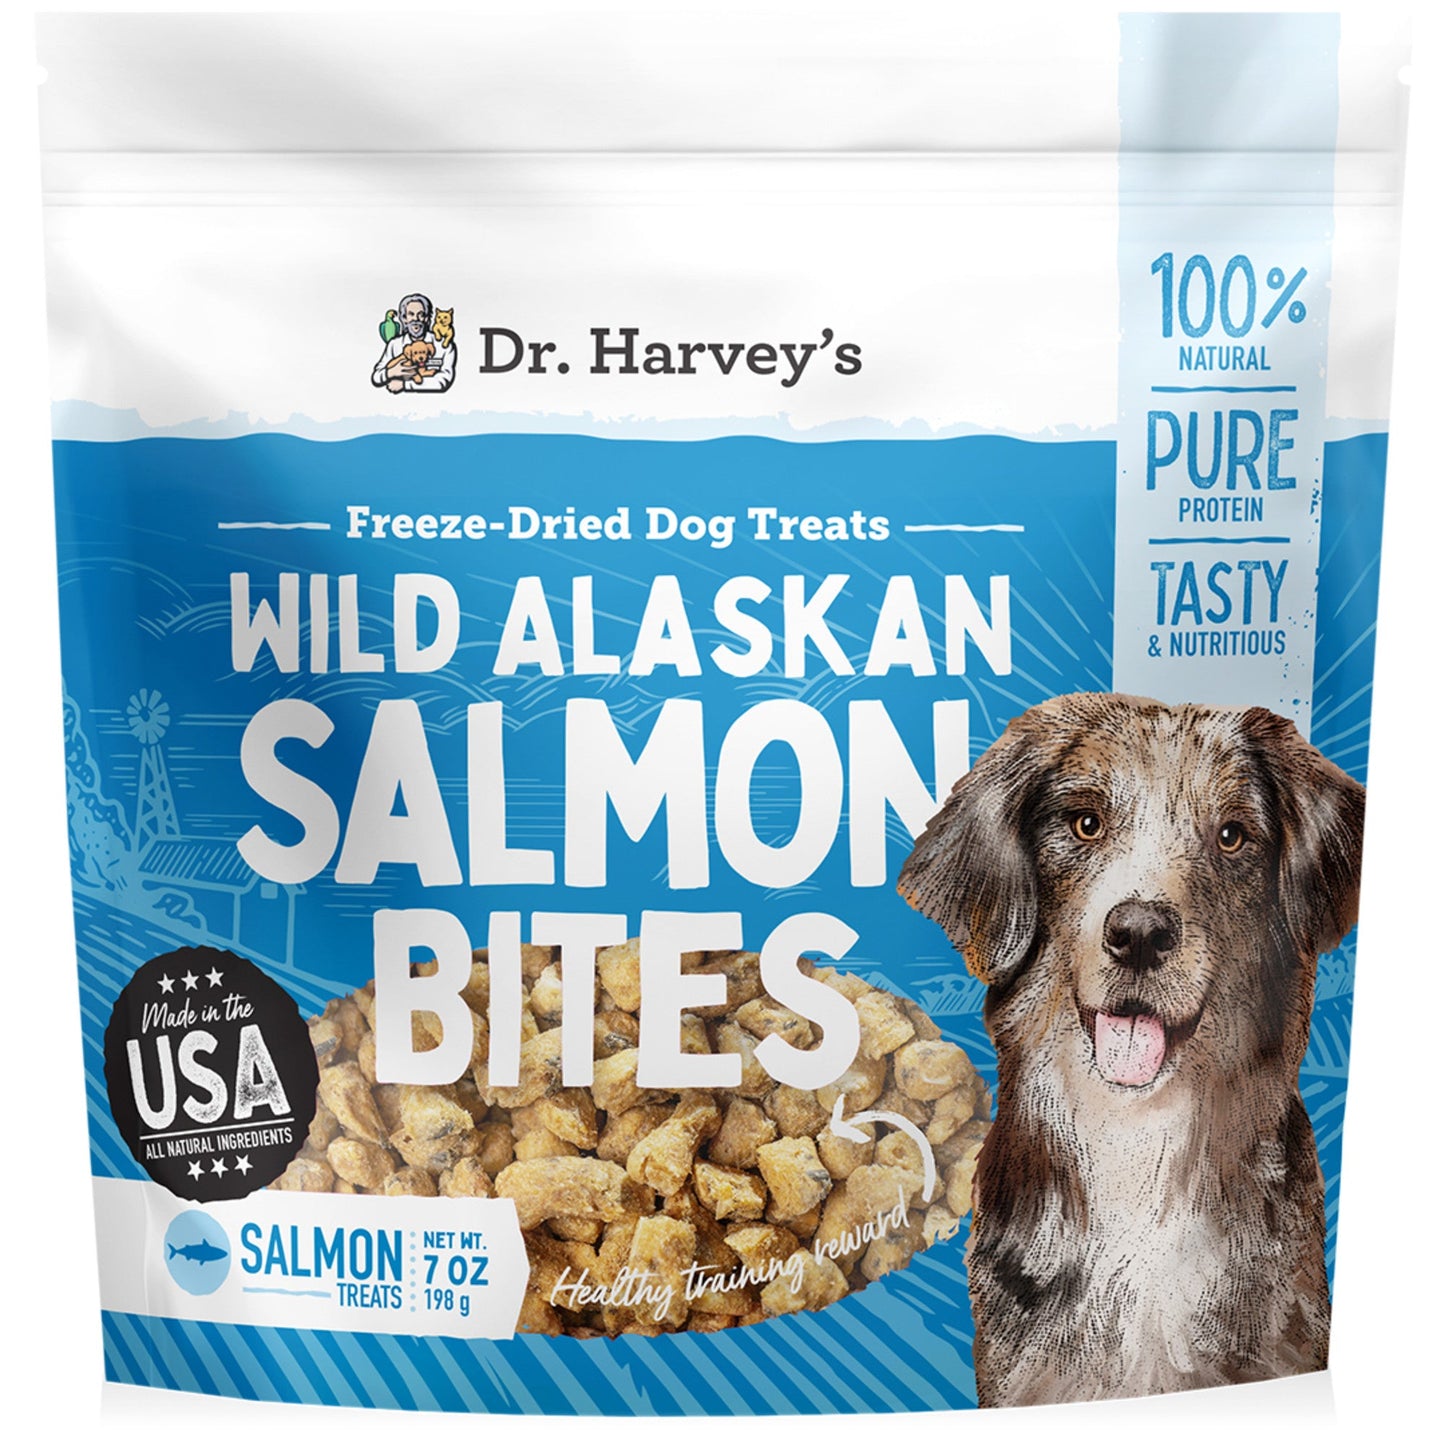 Dr. Harvey's Wild Alaskan Salmon Bites Freeze Dried Dog Training Treats with Salmon Meat for Dogs, 7 Ounces